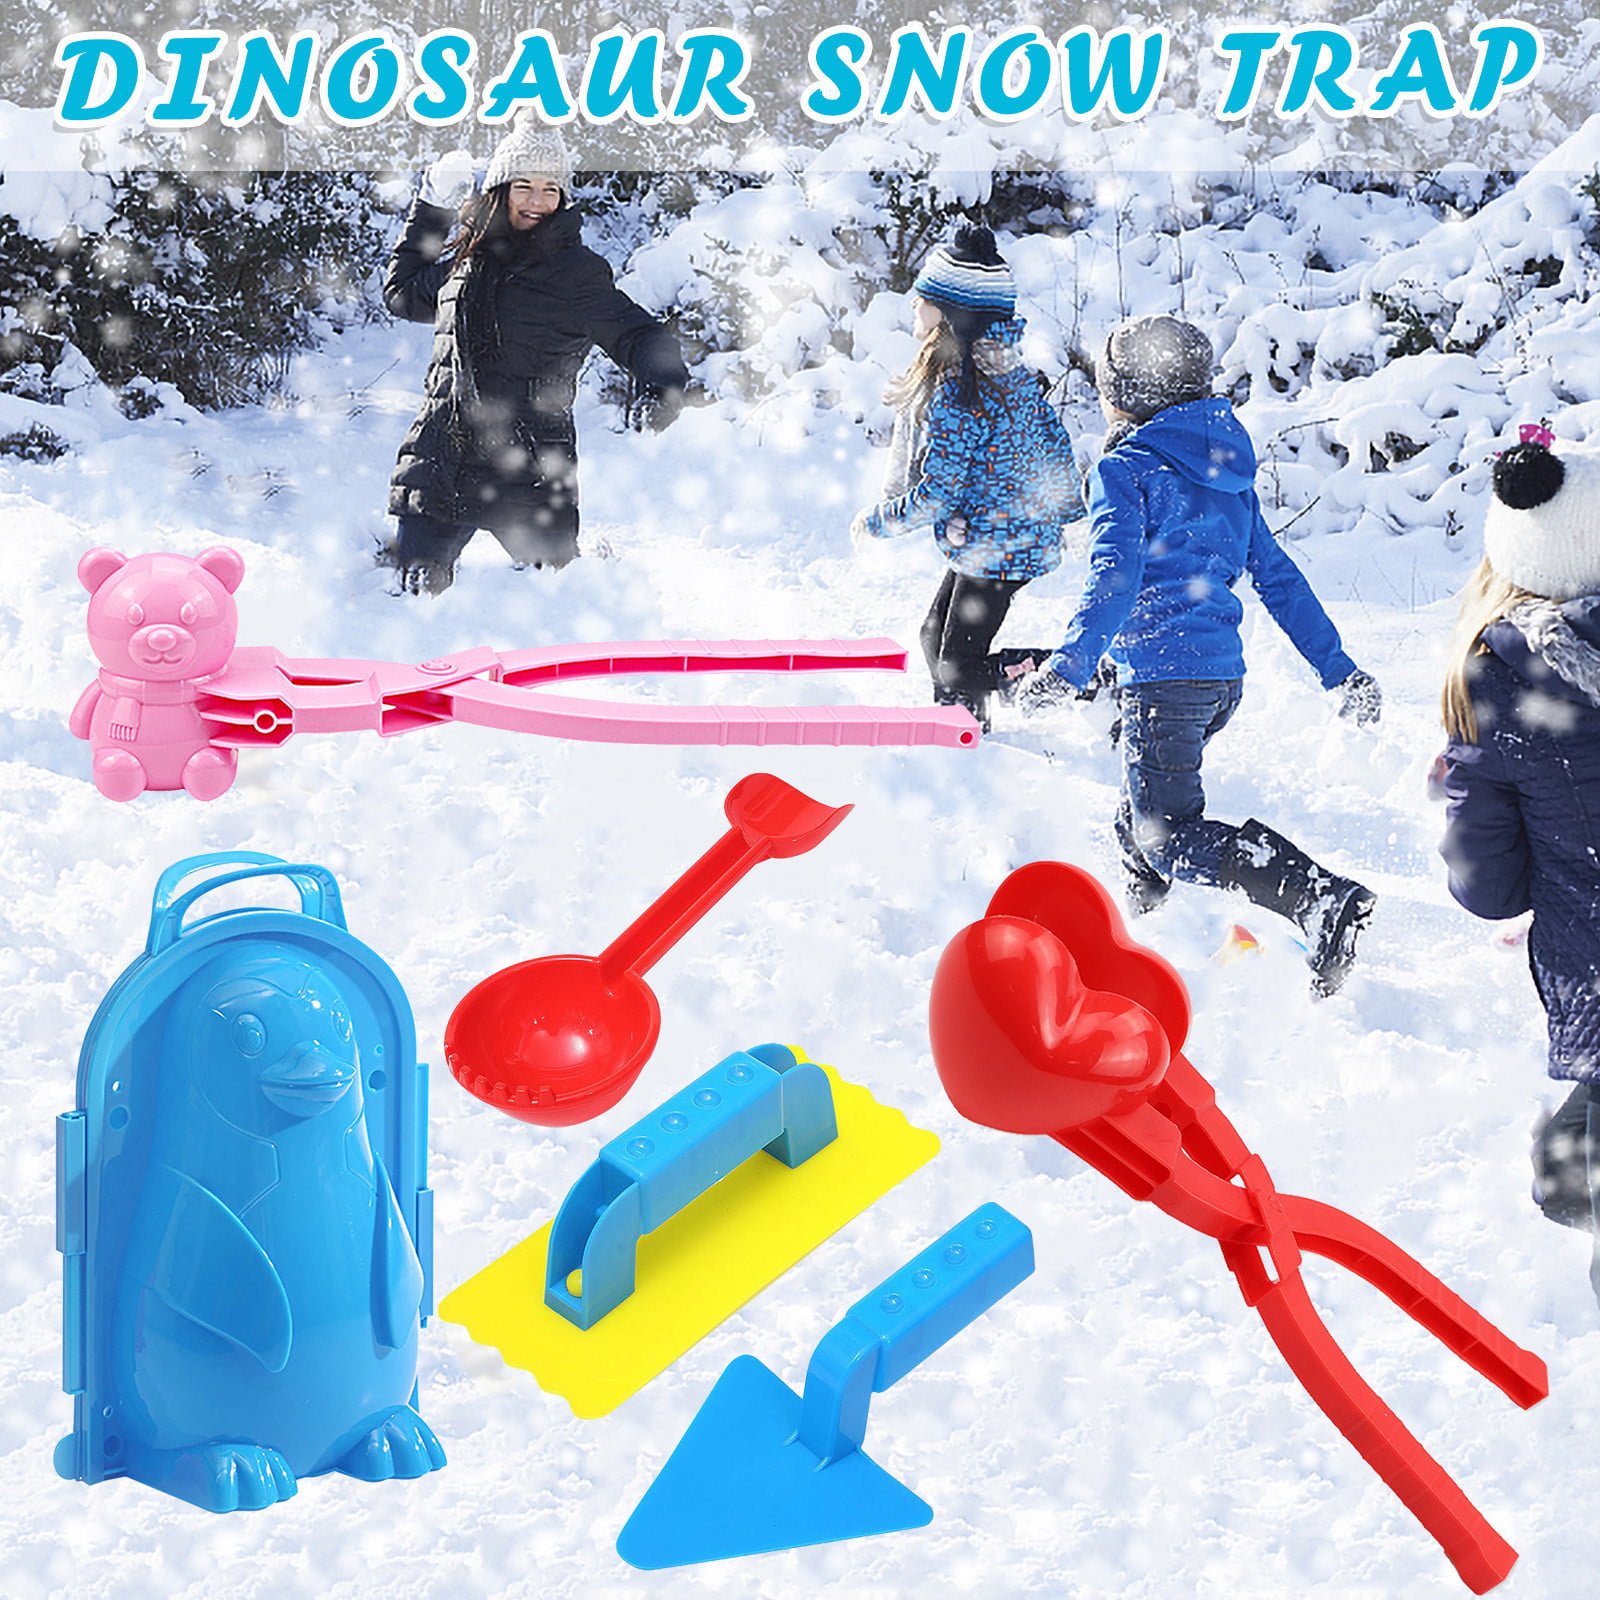 Winter Snow Ball Maker Tool Clip Kid Mold Sand Scoop Snowball Toy Sports HOT 